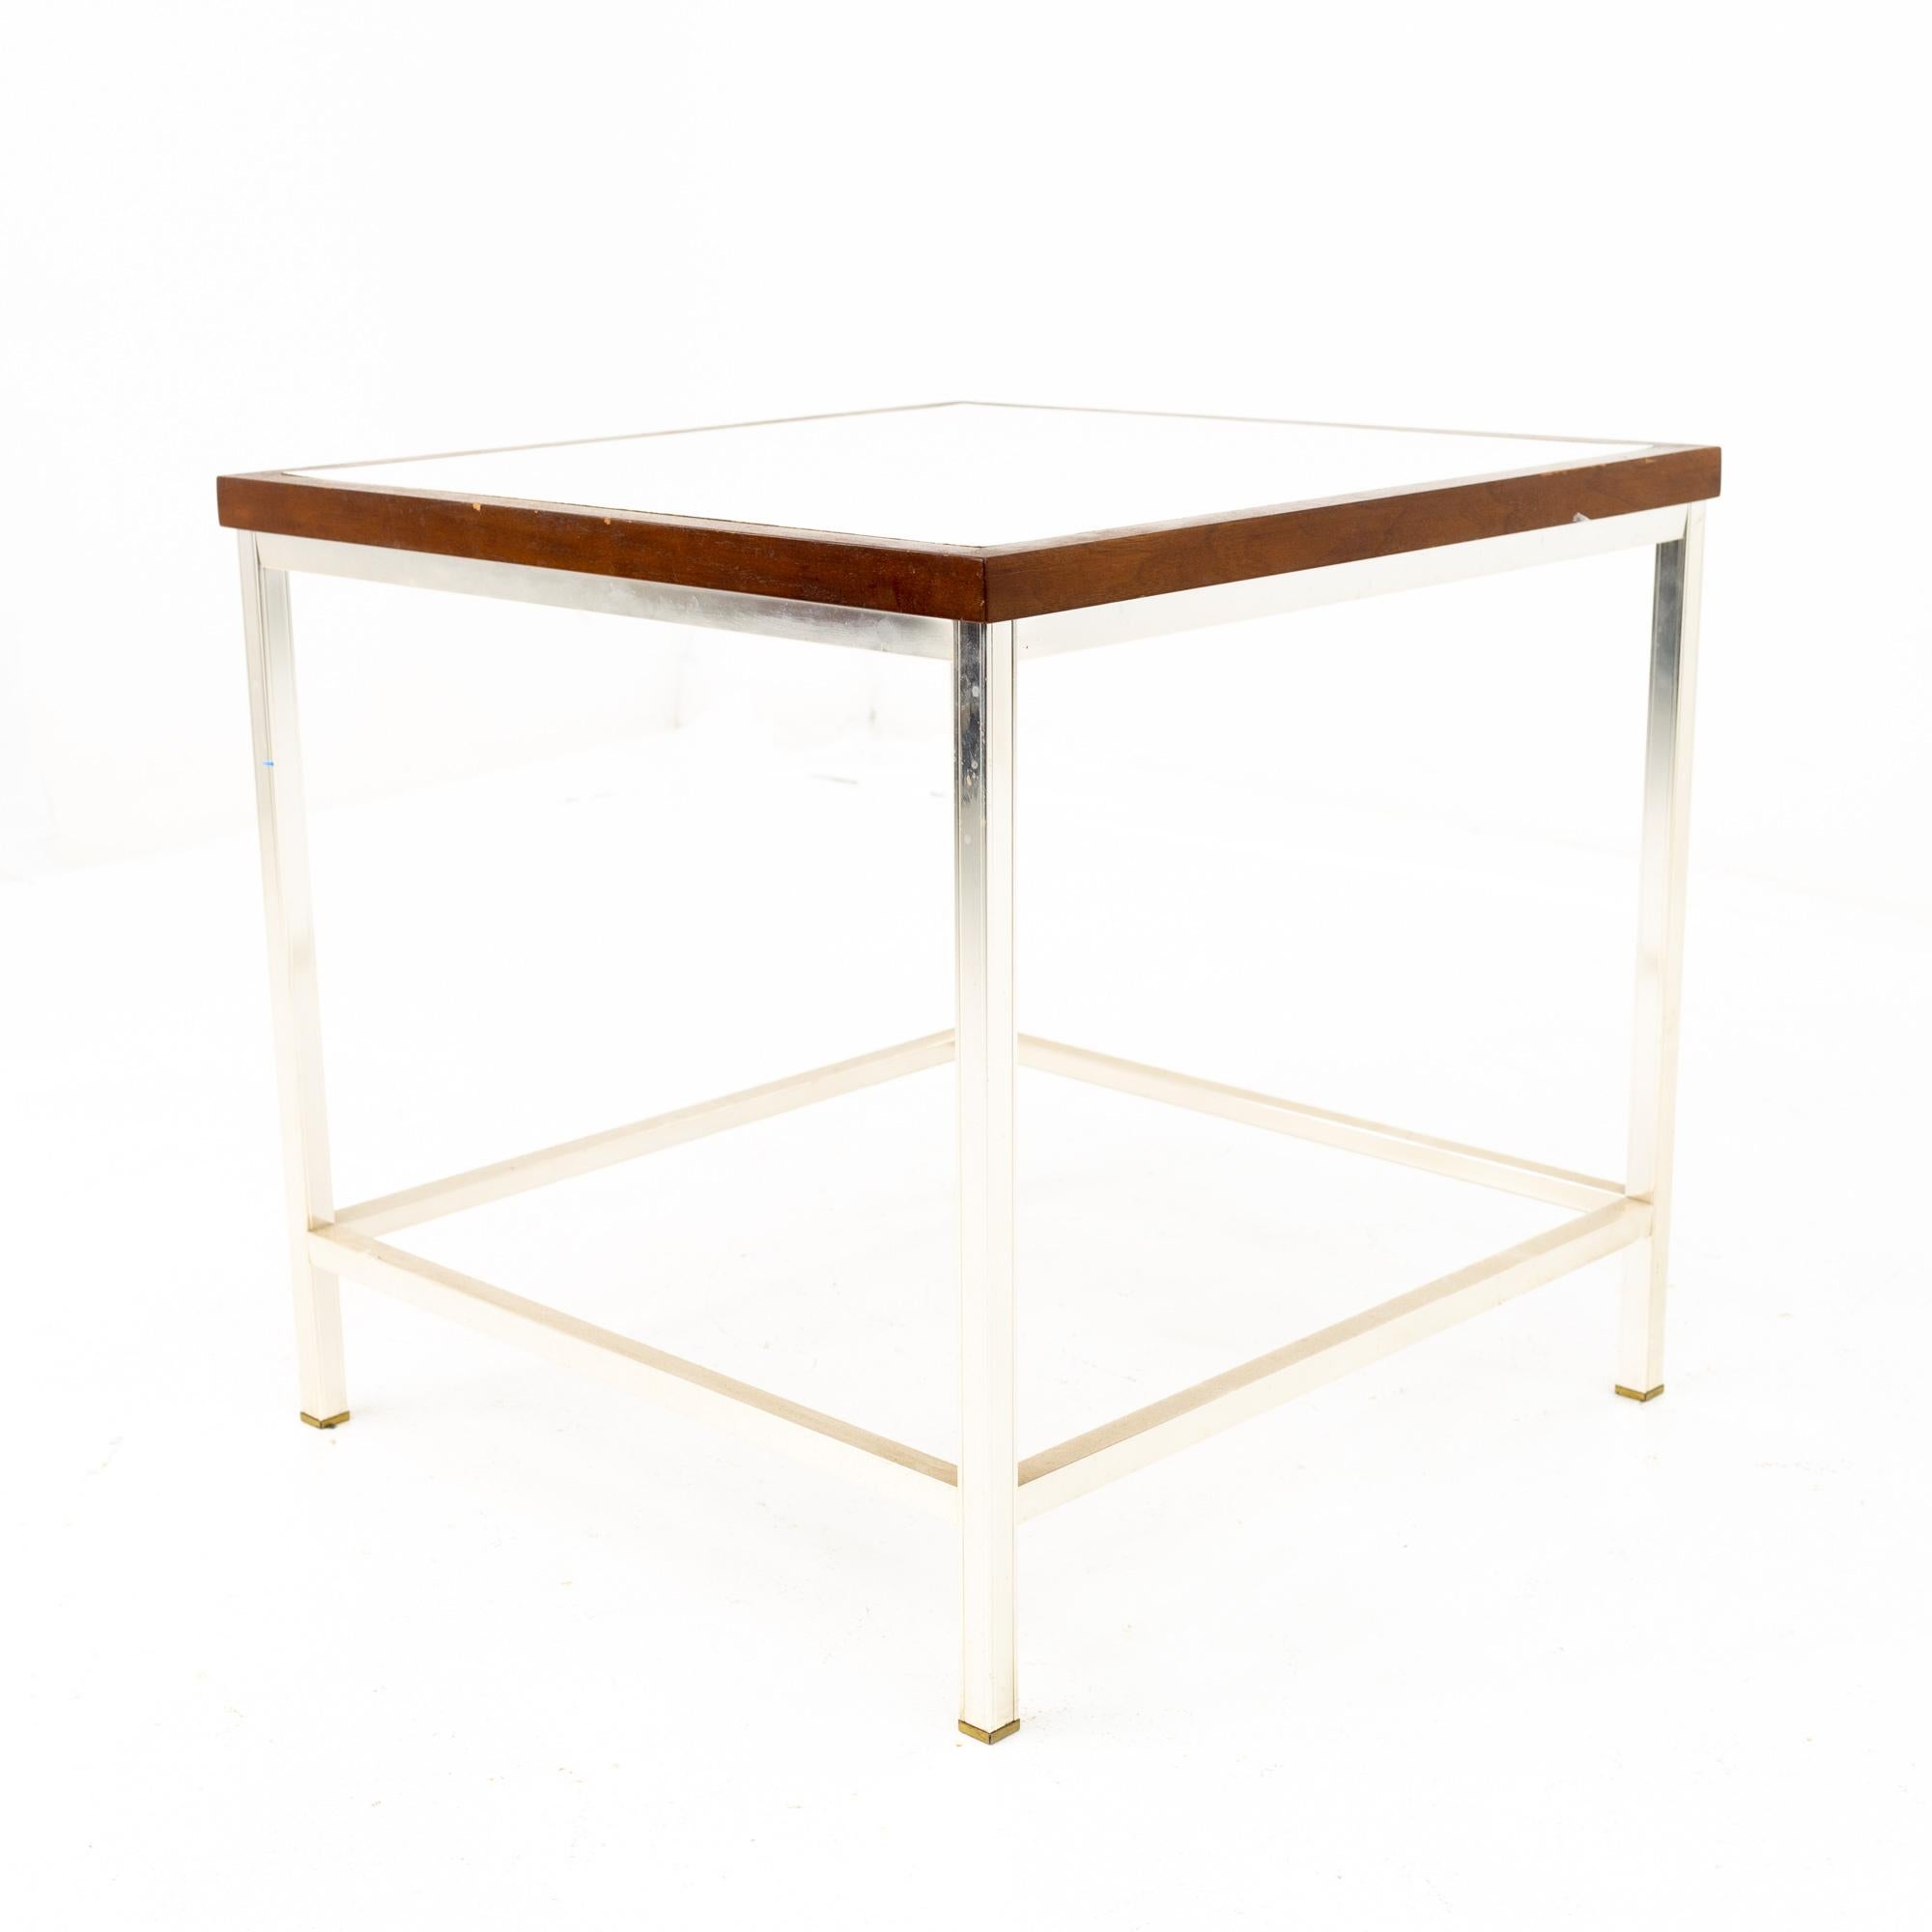 Mid century walnut laminate and chrome side end table
This end table is 22 wide x 22 deep x 21 inches high

All pieces of furniture can be had in what we call restored vintage condition. That means the piece is restored upon purchase so it’s free